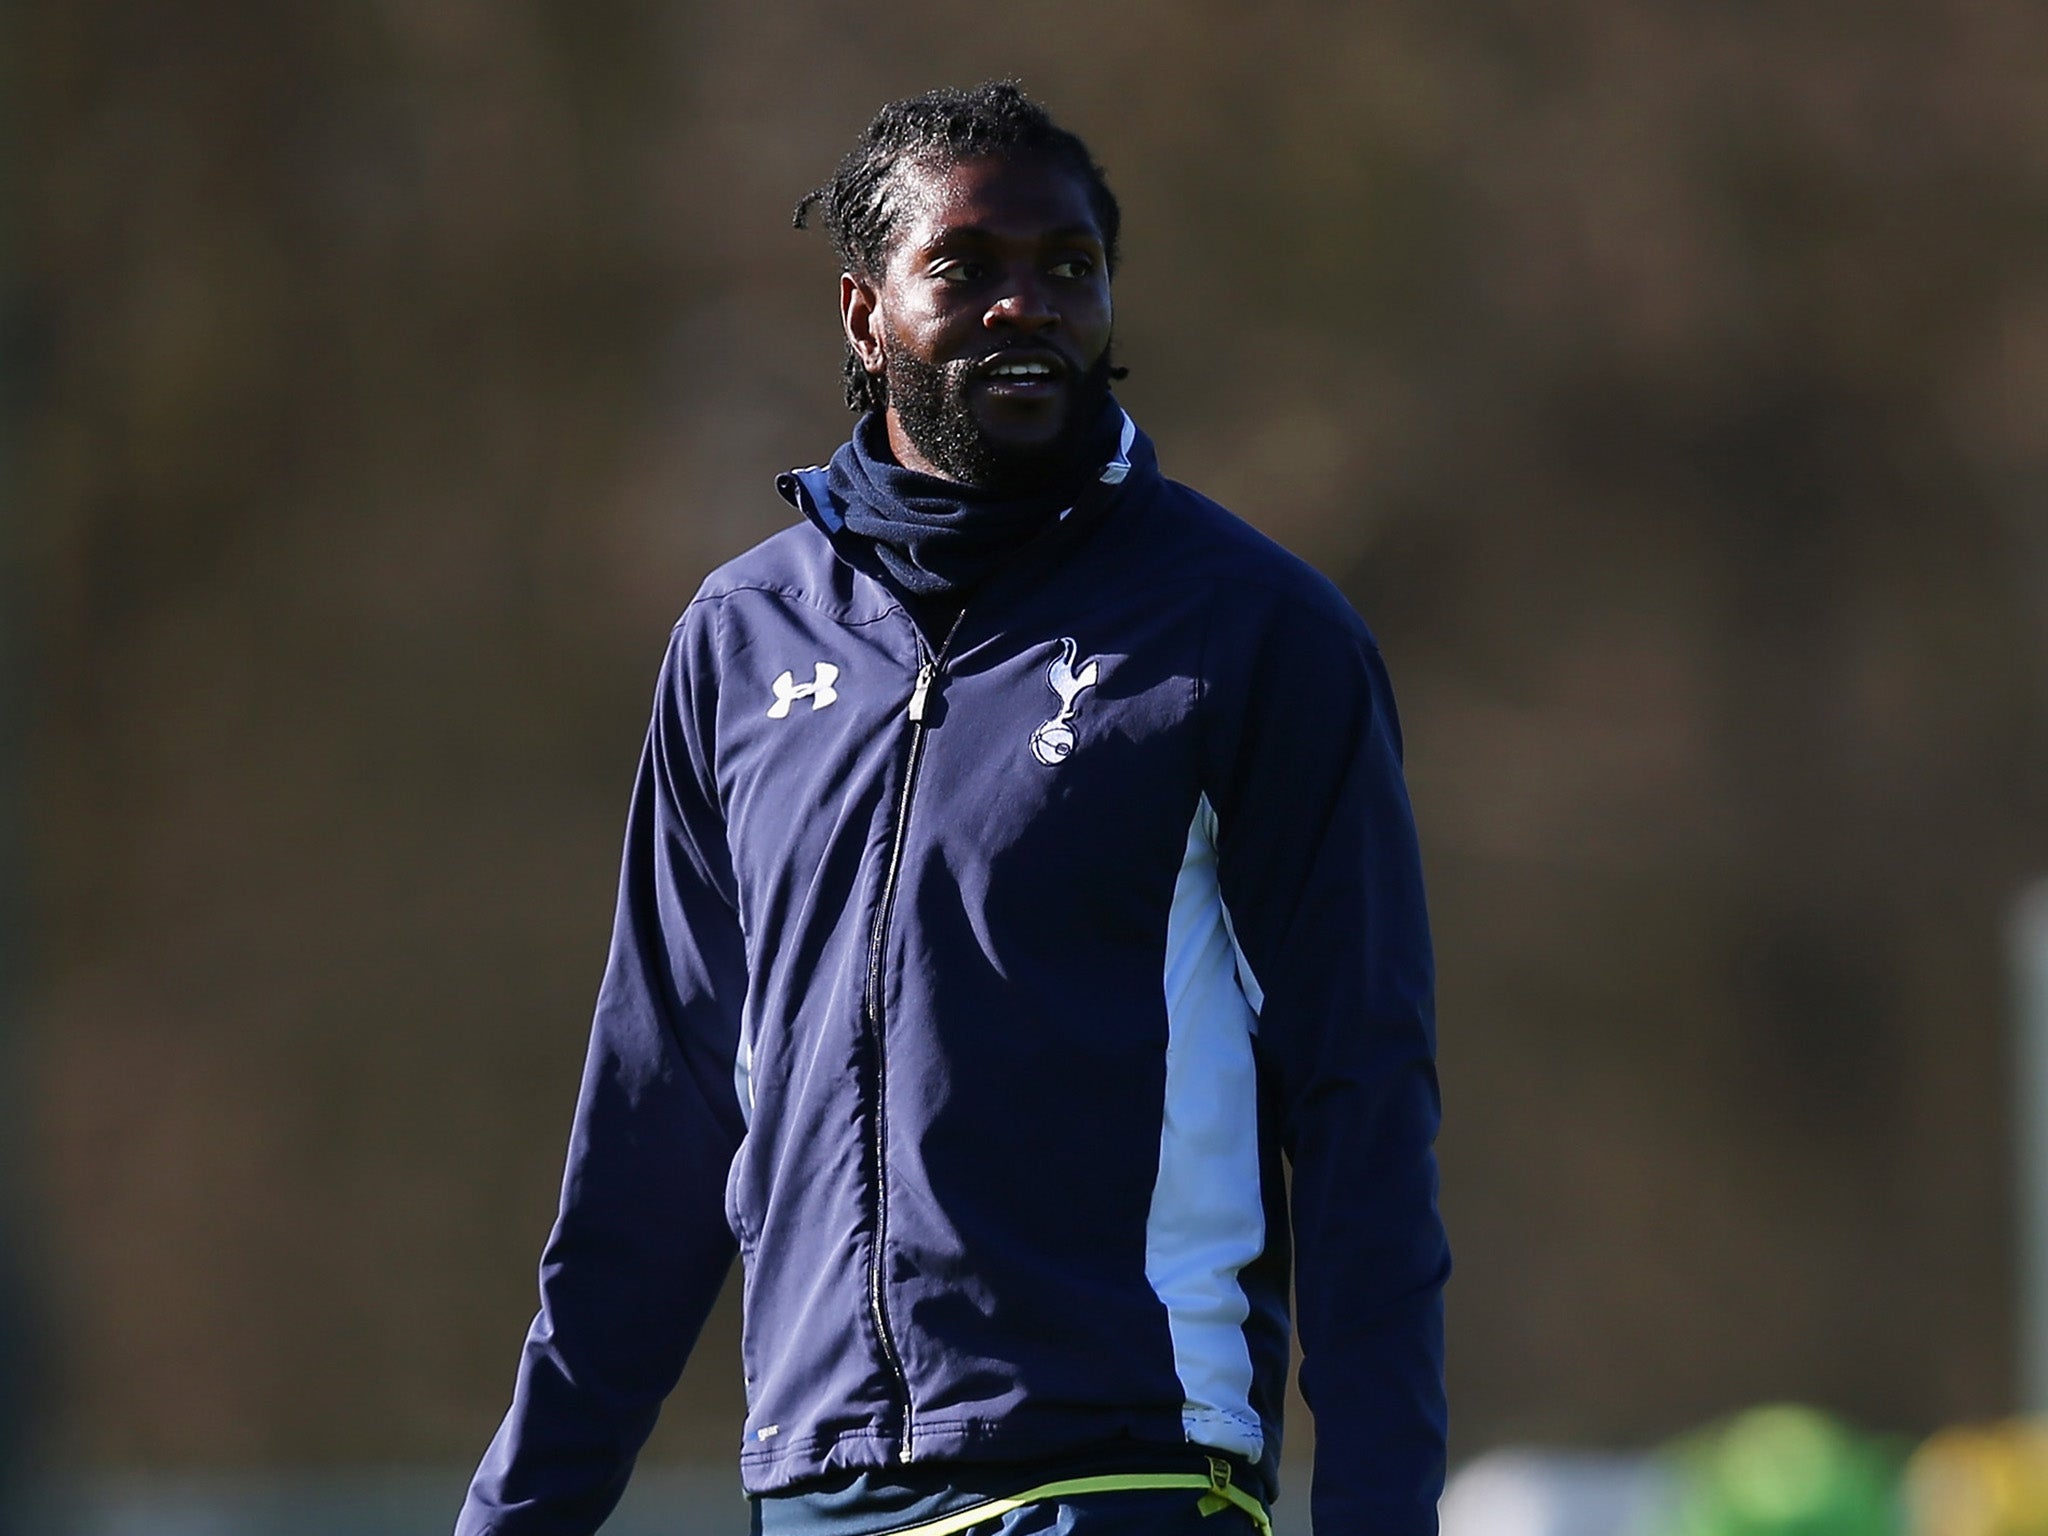 Emmanuel Adebayor has decided to train with Tottenham's Under-21s rather than the first team